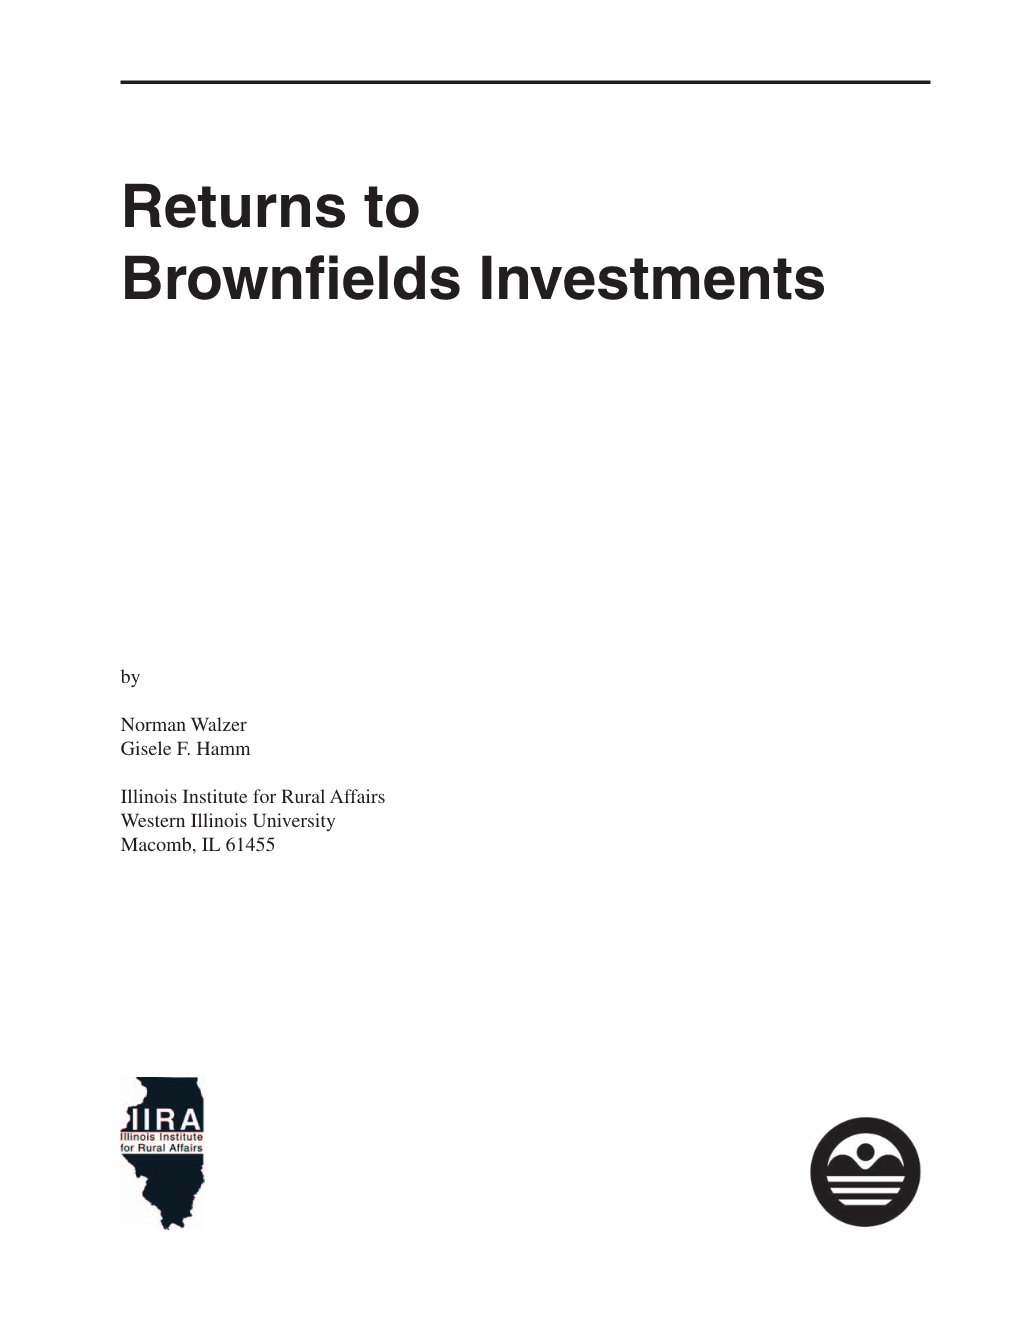 Returns to Brownfields Investments